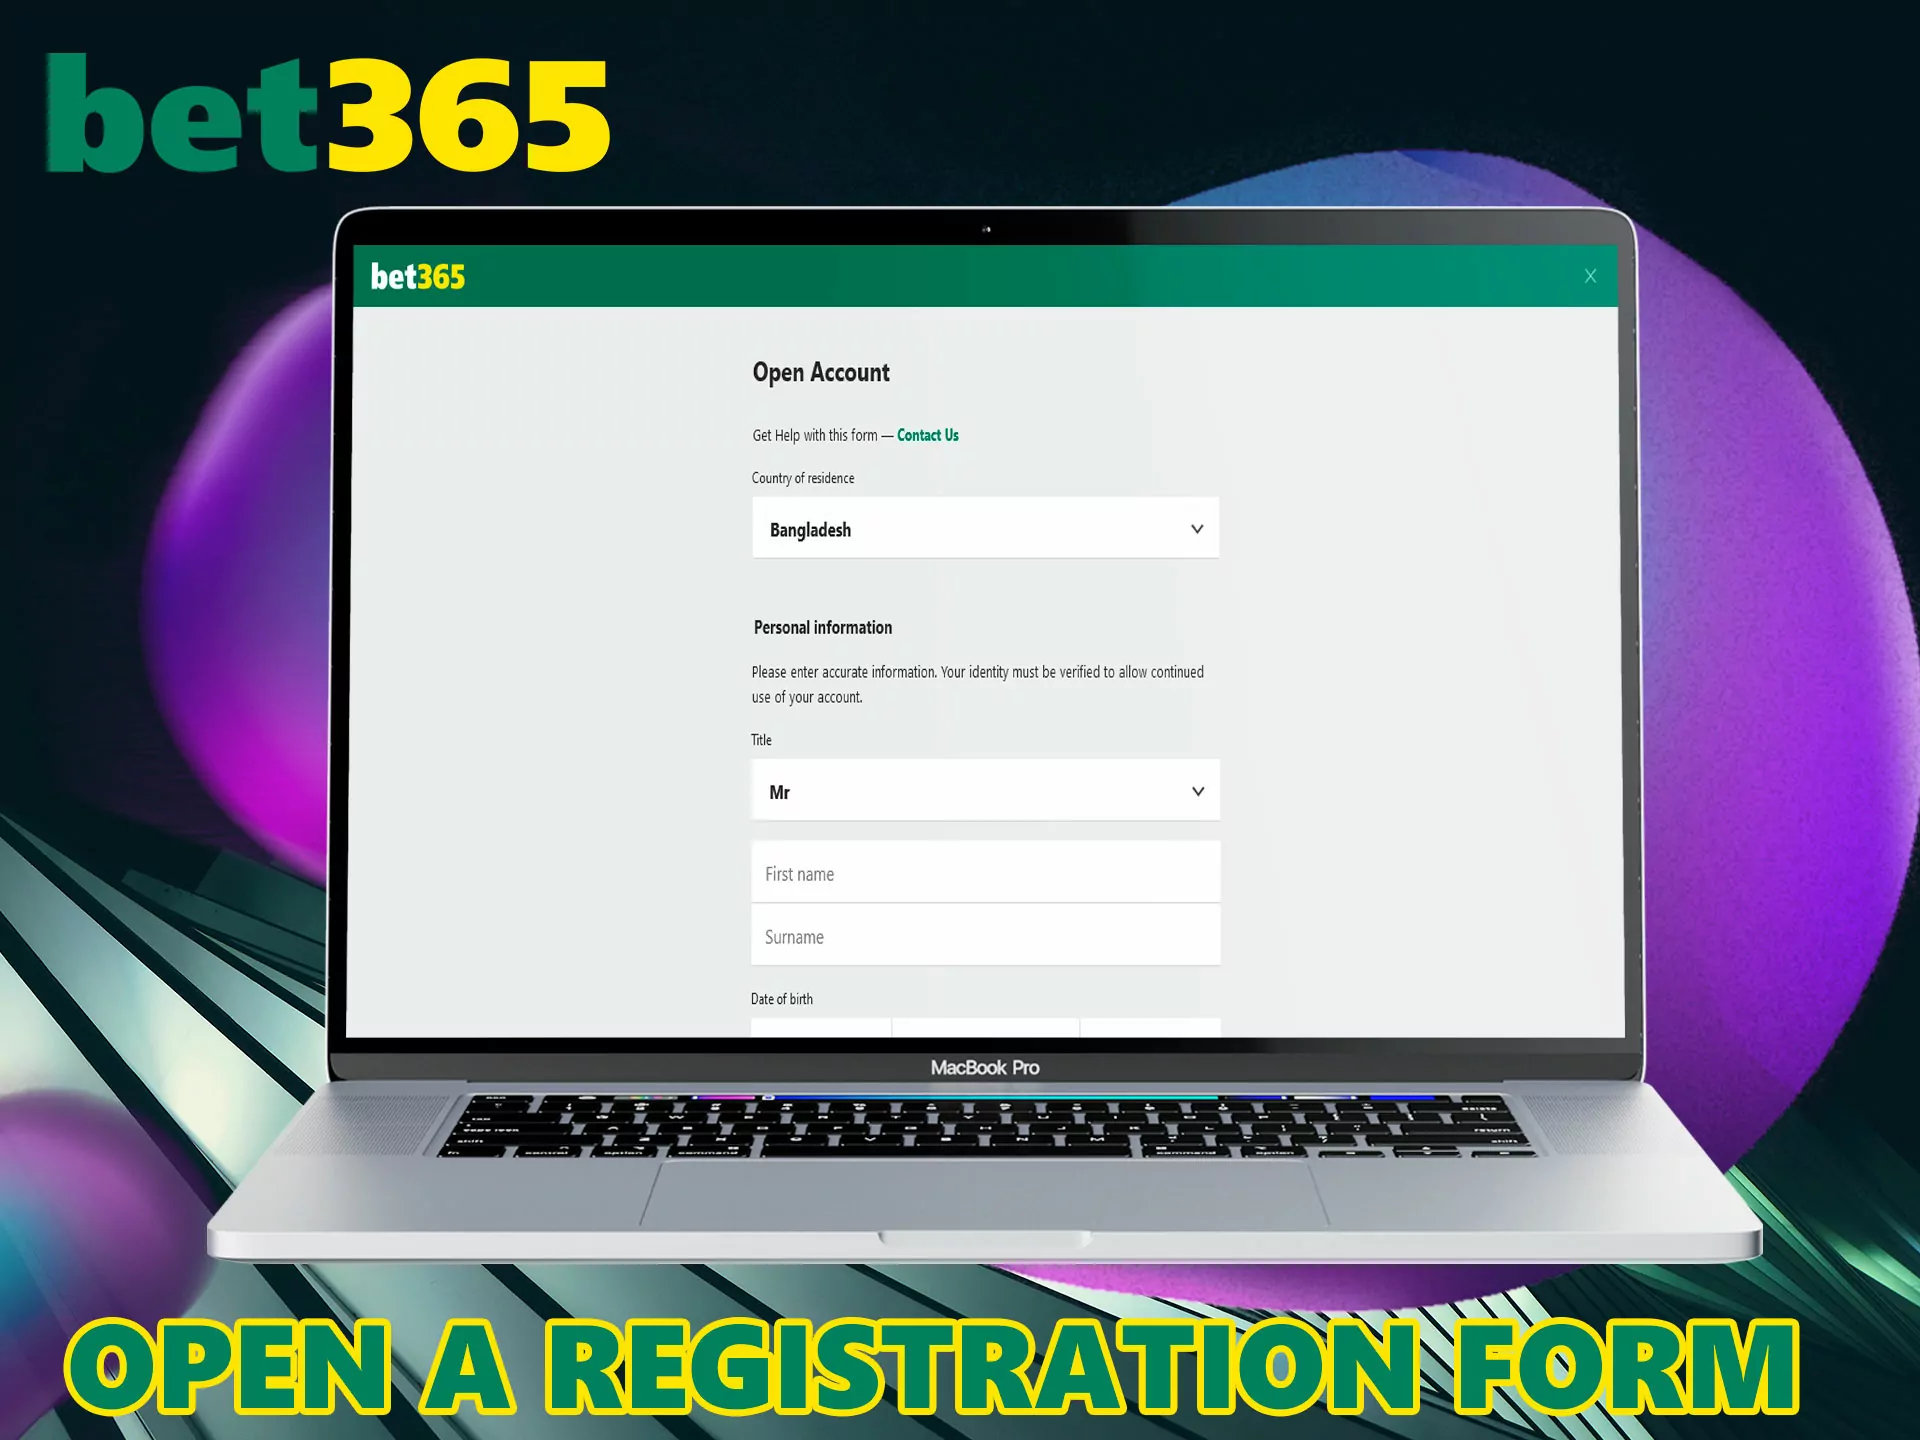 At the top of the site there is a "Join" button, click on it to start the registration process.